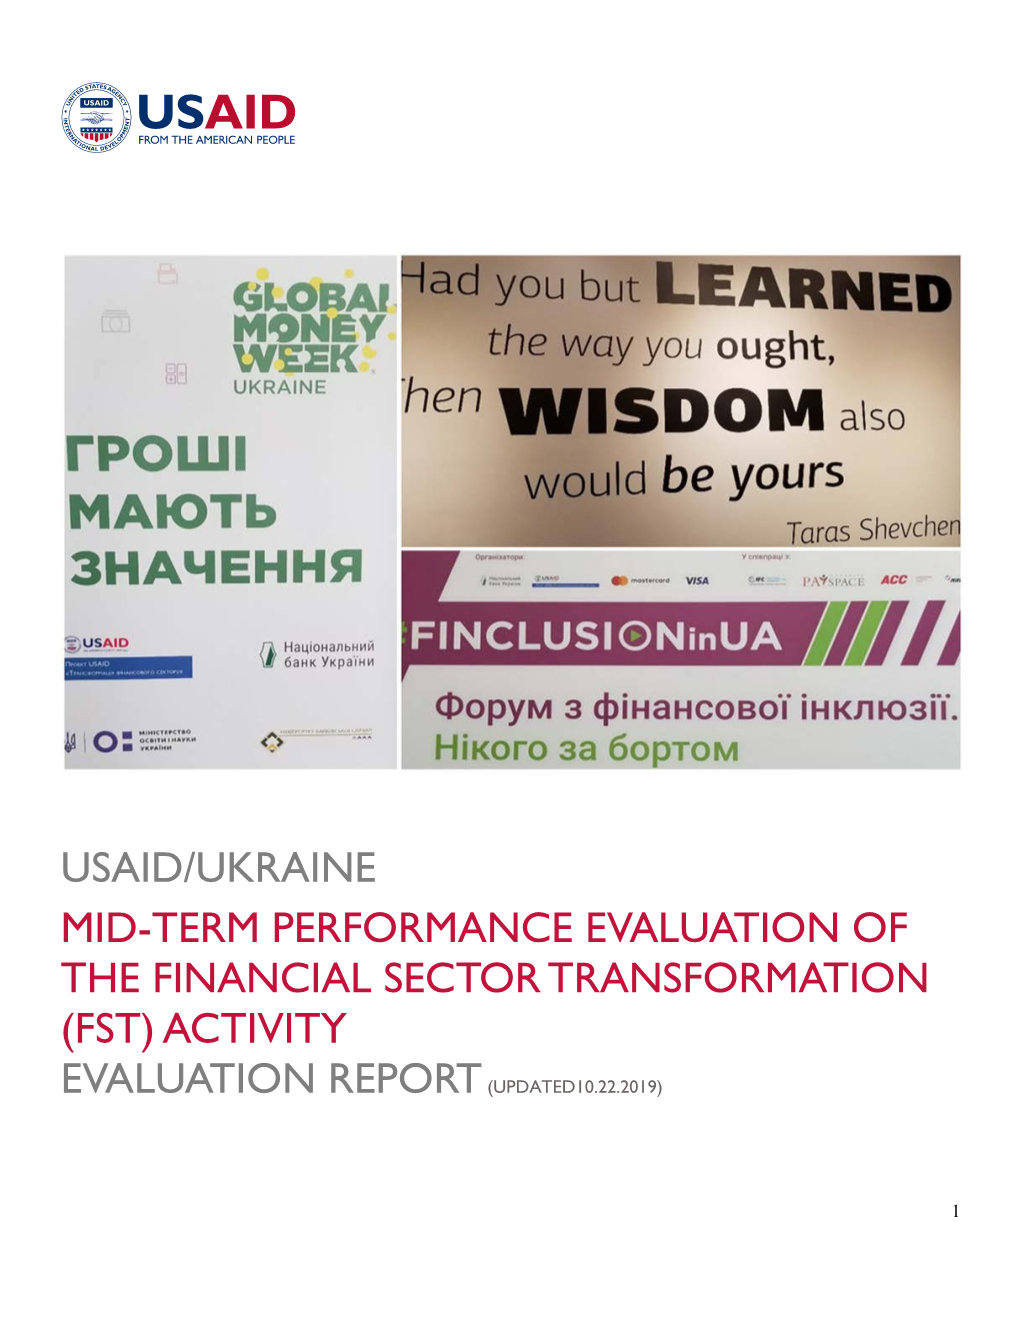 Usaid/Ukraine Mid-Term Performance Evaluation of the Financial Sector Transformation (Fst) Activity Evaluation Report (Updated10.22.2019)